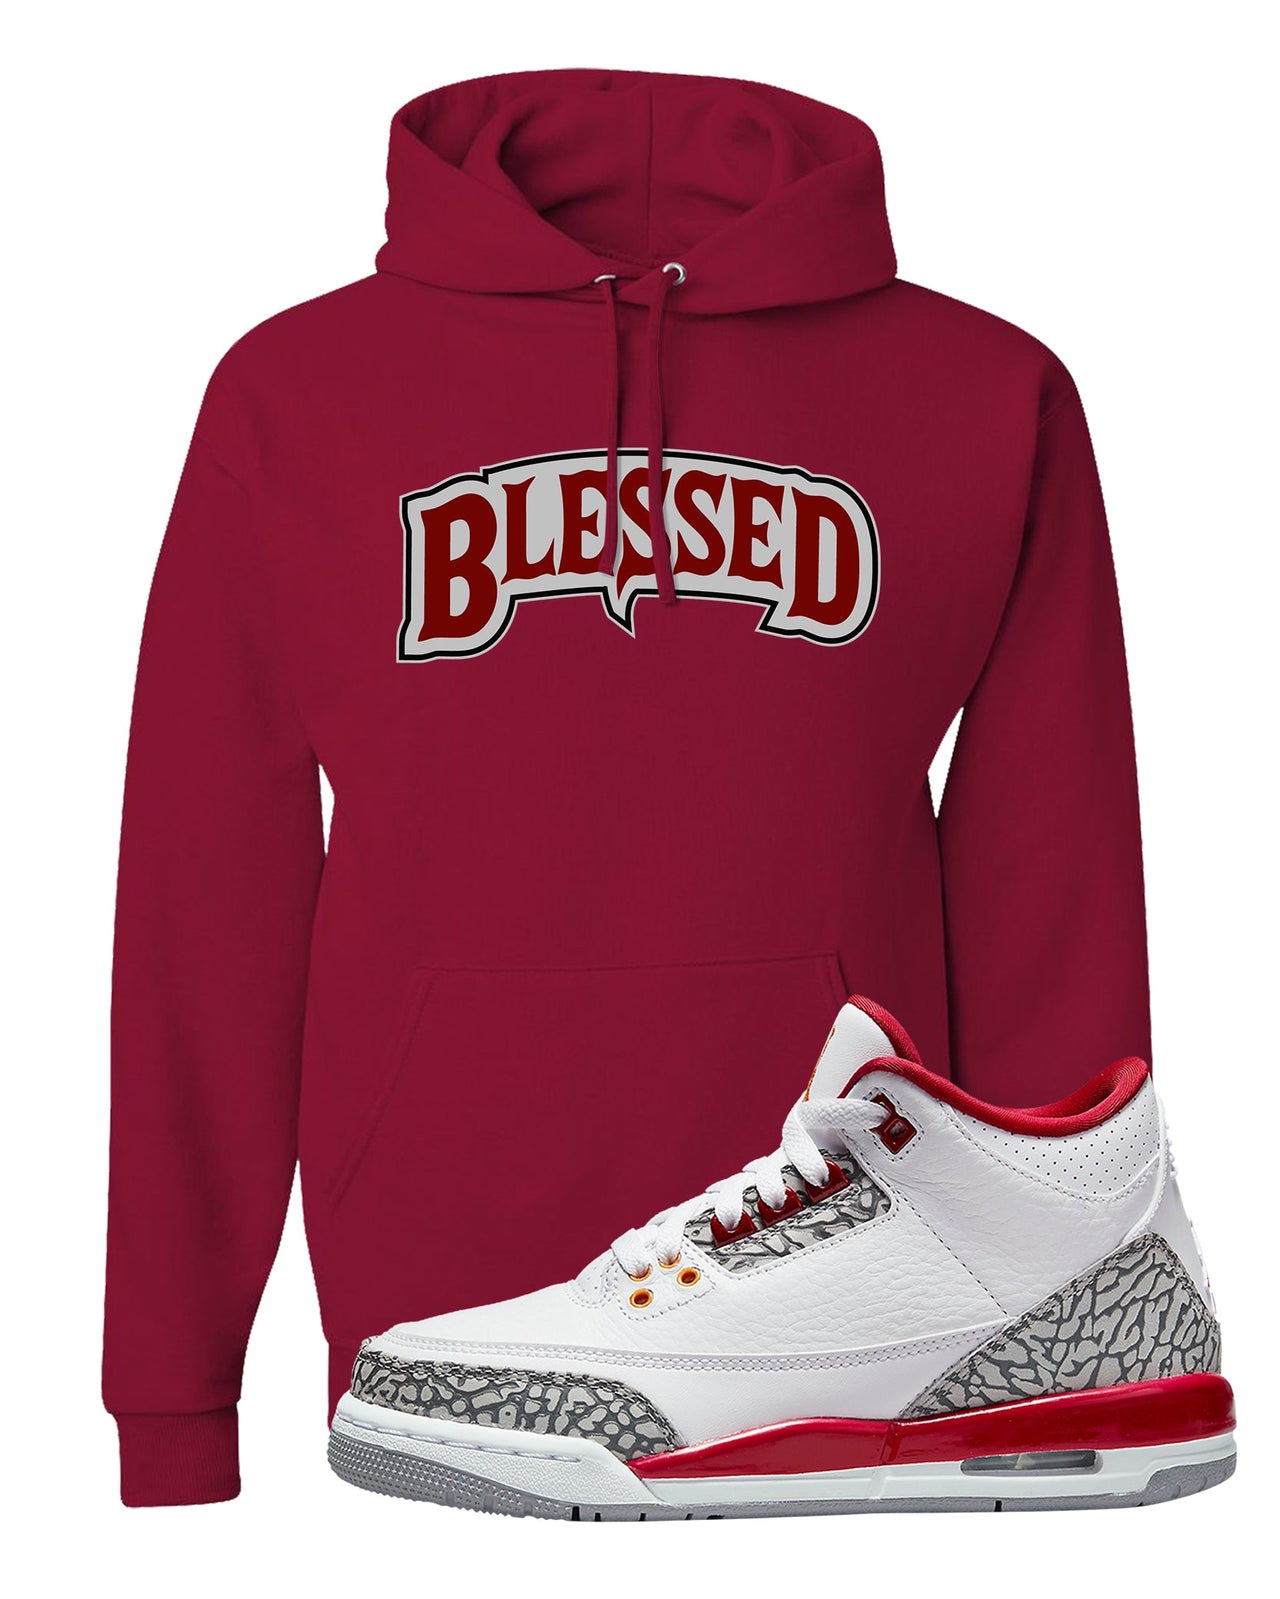 Cardinal Red 3s Hoodie | Blessed Arch, Cardinal